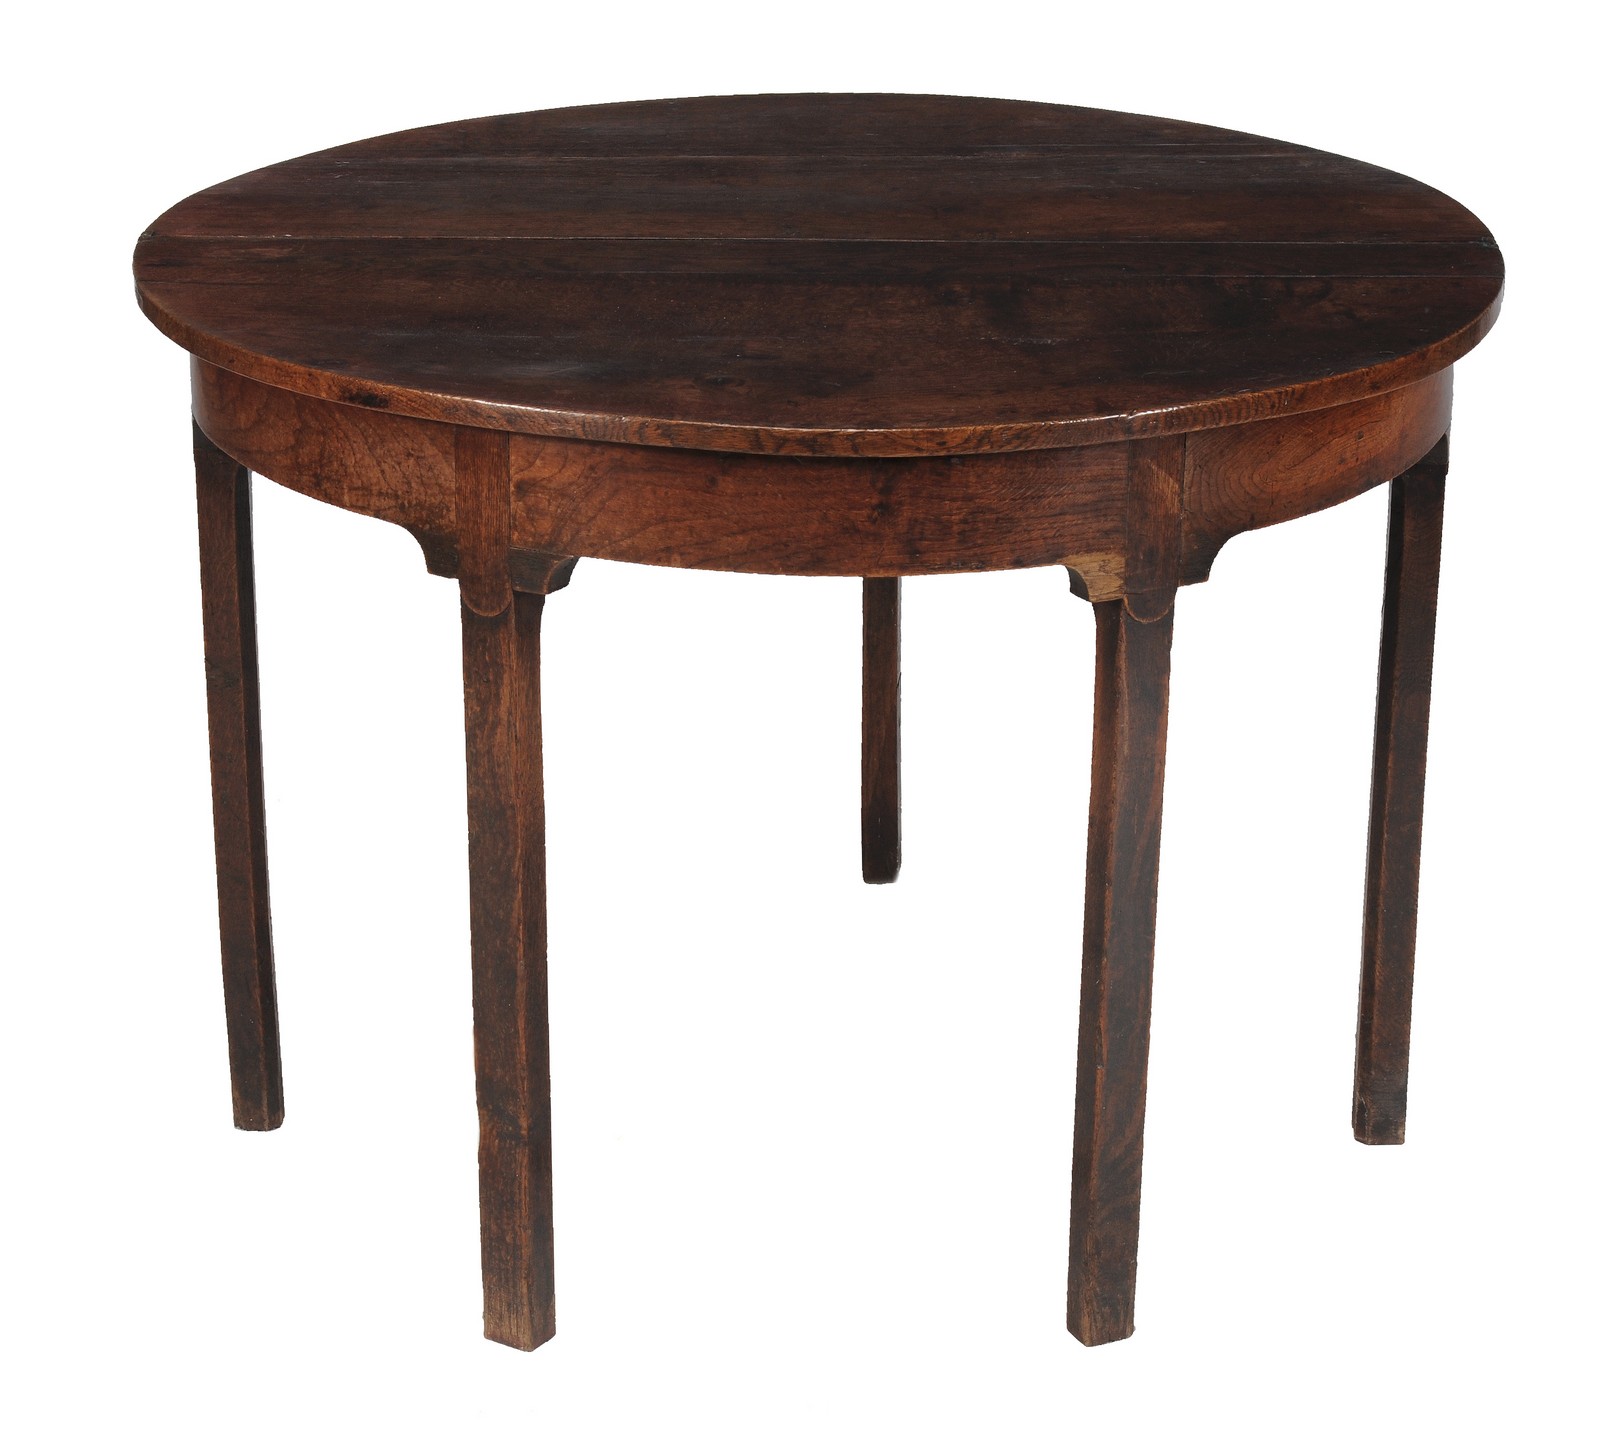 A George III oak demi-lune tea table, with a folding top, on shaped frieze and chamfered legs